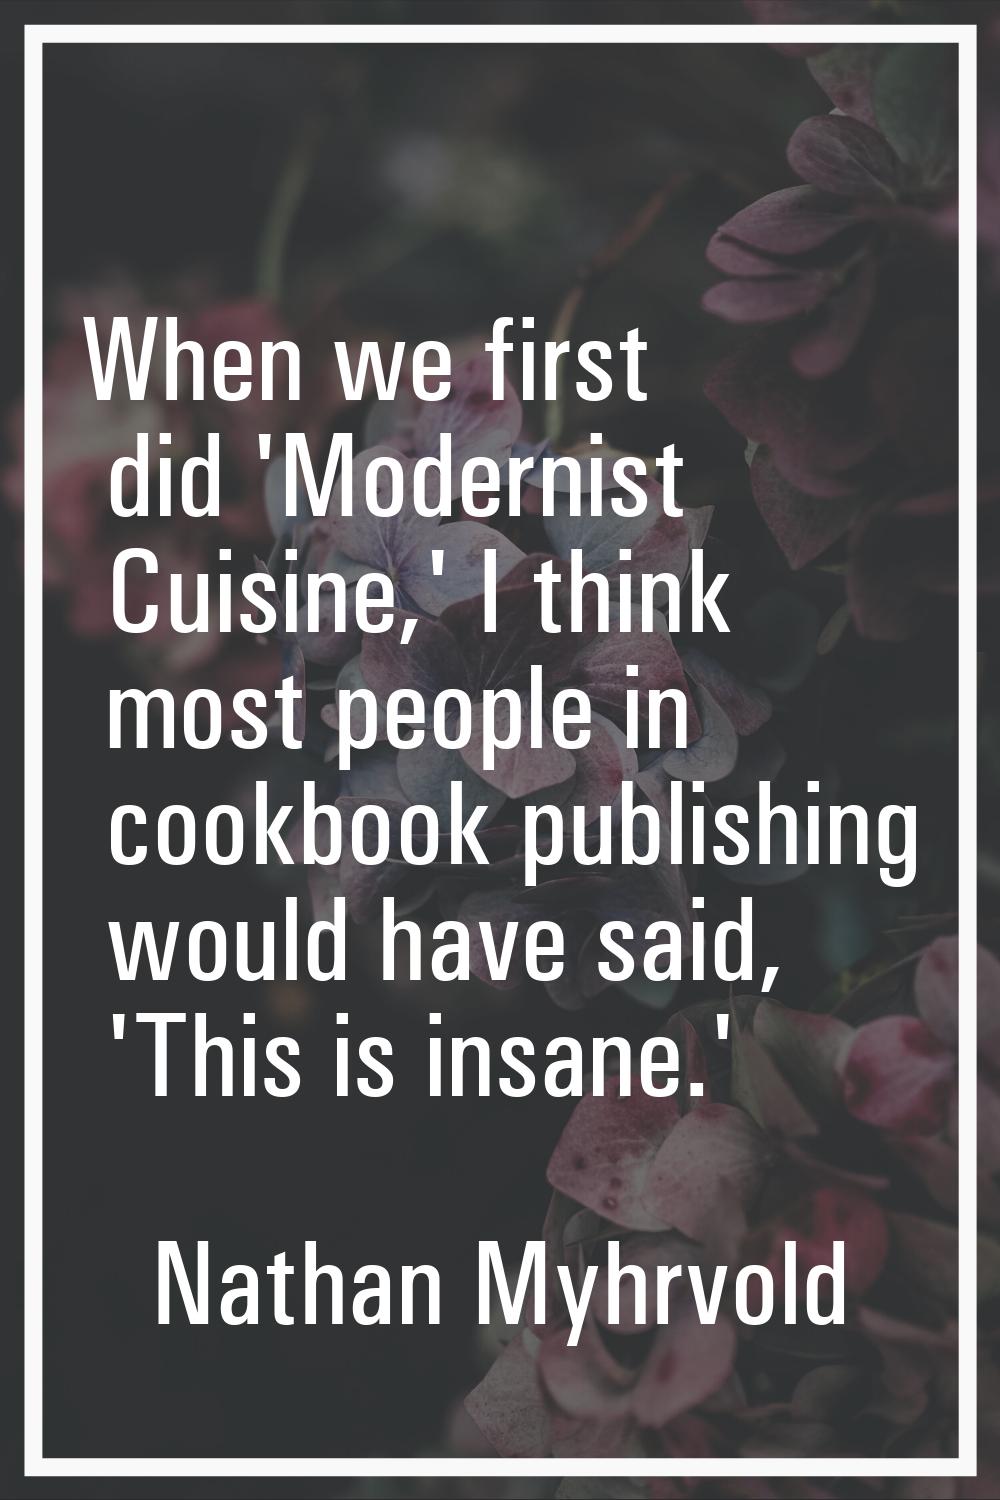 When we first did 'Modernist Cuisine,' I think most people in cookbook publishing would have said, 